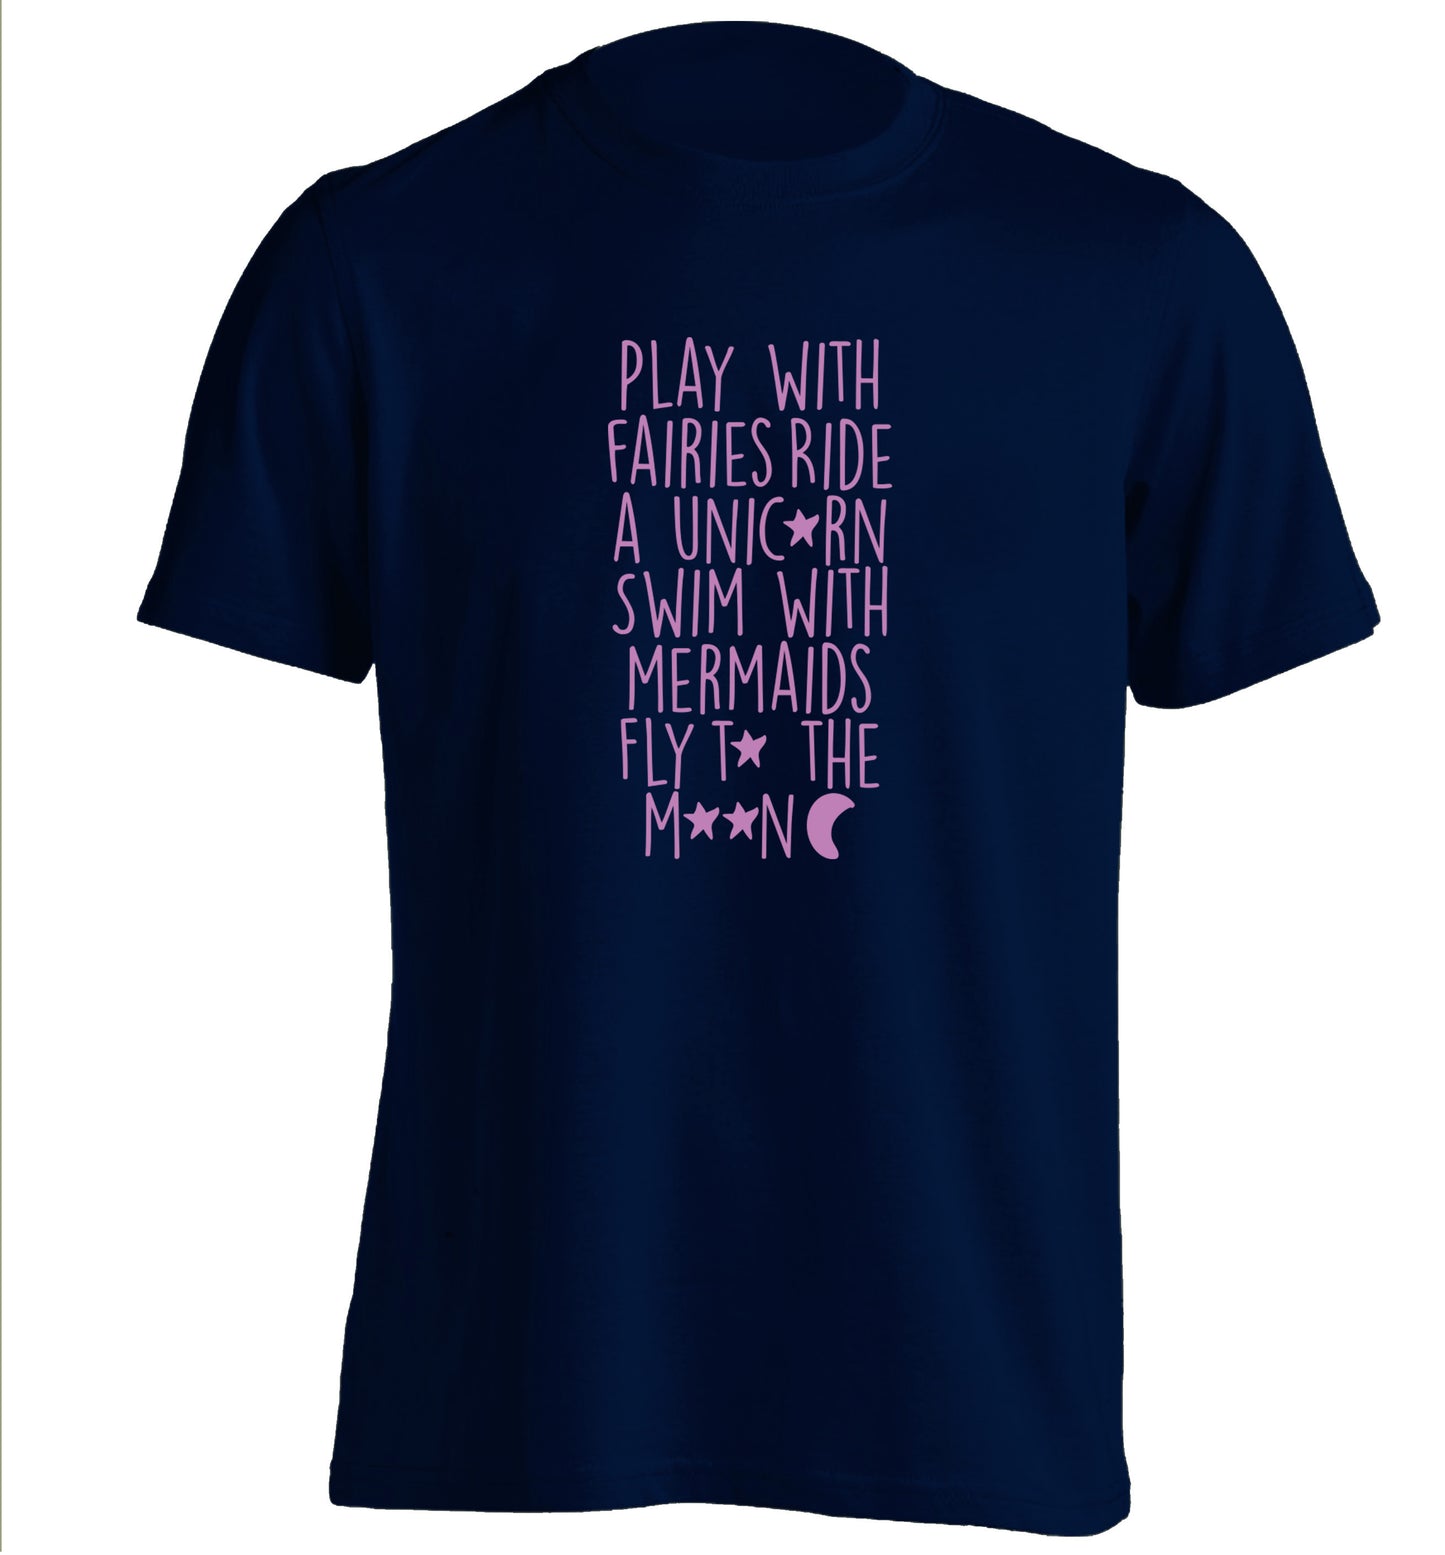 Play with fairies ride a unicorn swim with mermaids fly to the moon adults unisex navy Tshirt 2XL